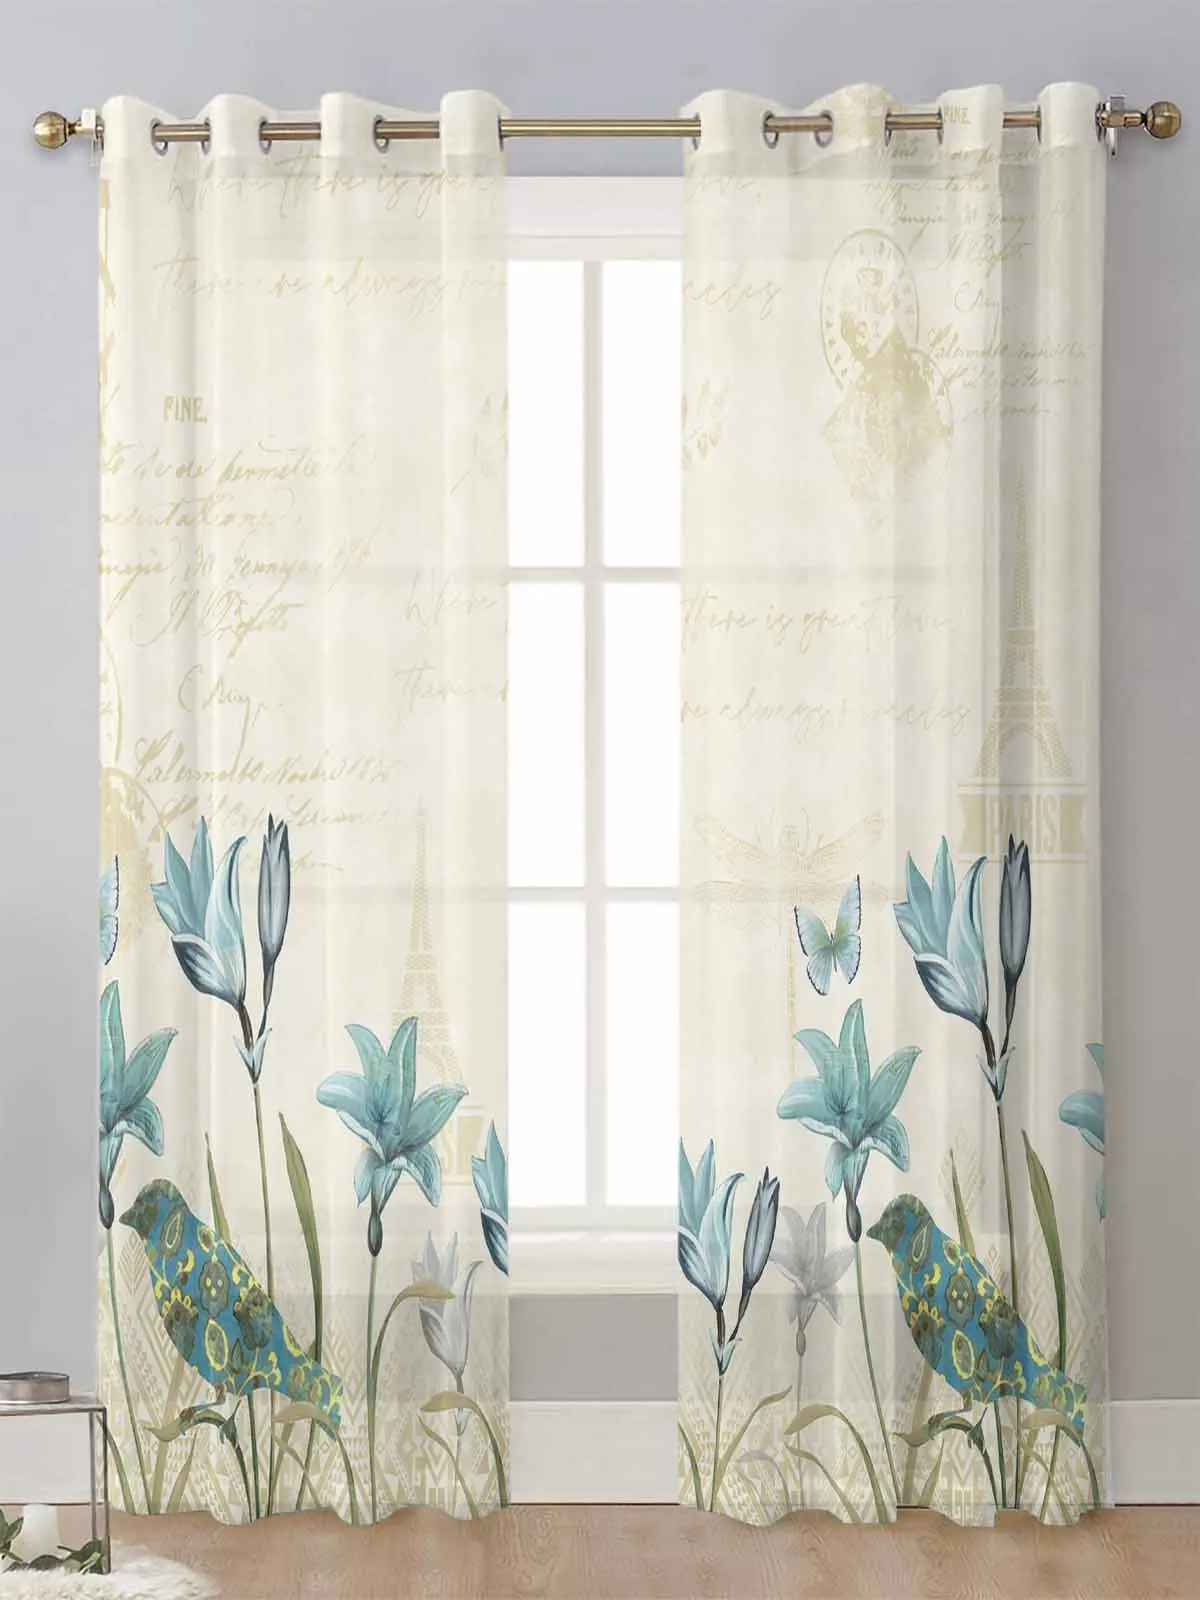 

Rustic Vintage Tulip Flower Bird Sheer Curtains For Living Room Window Voile Tulle Curtain Cortinas Drapes Home Decor